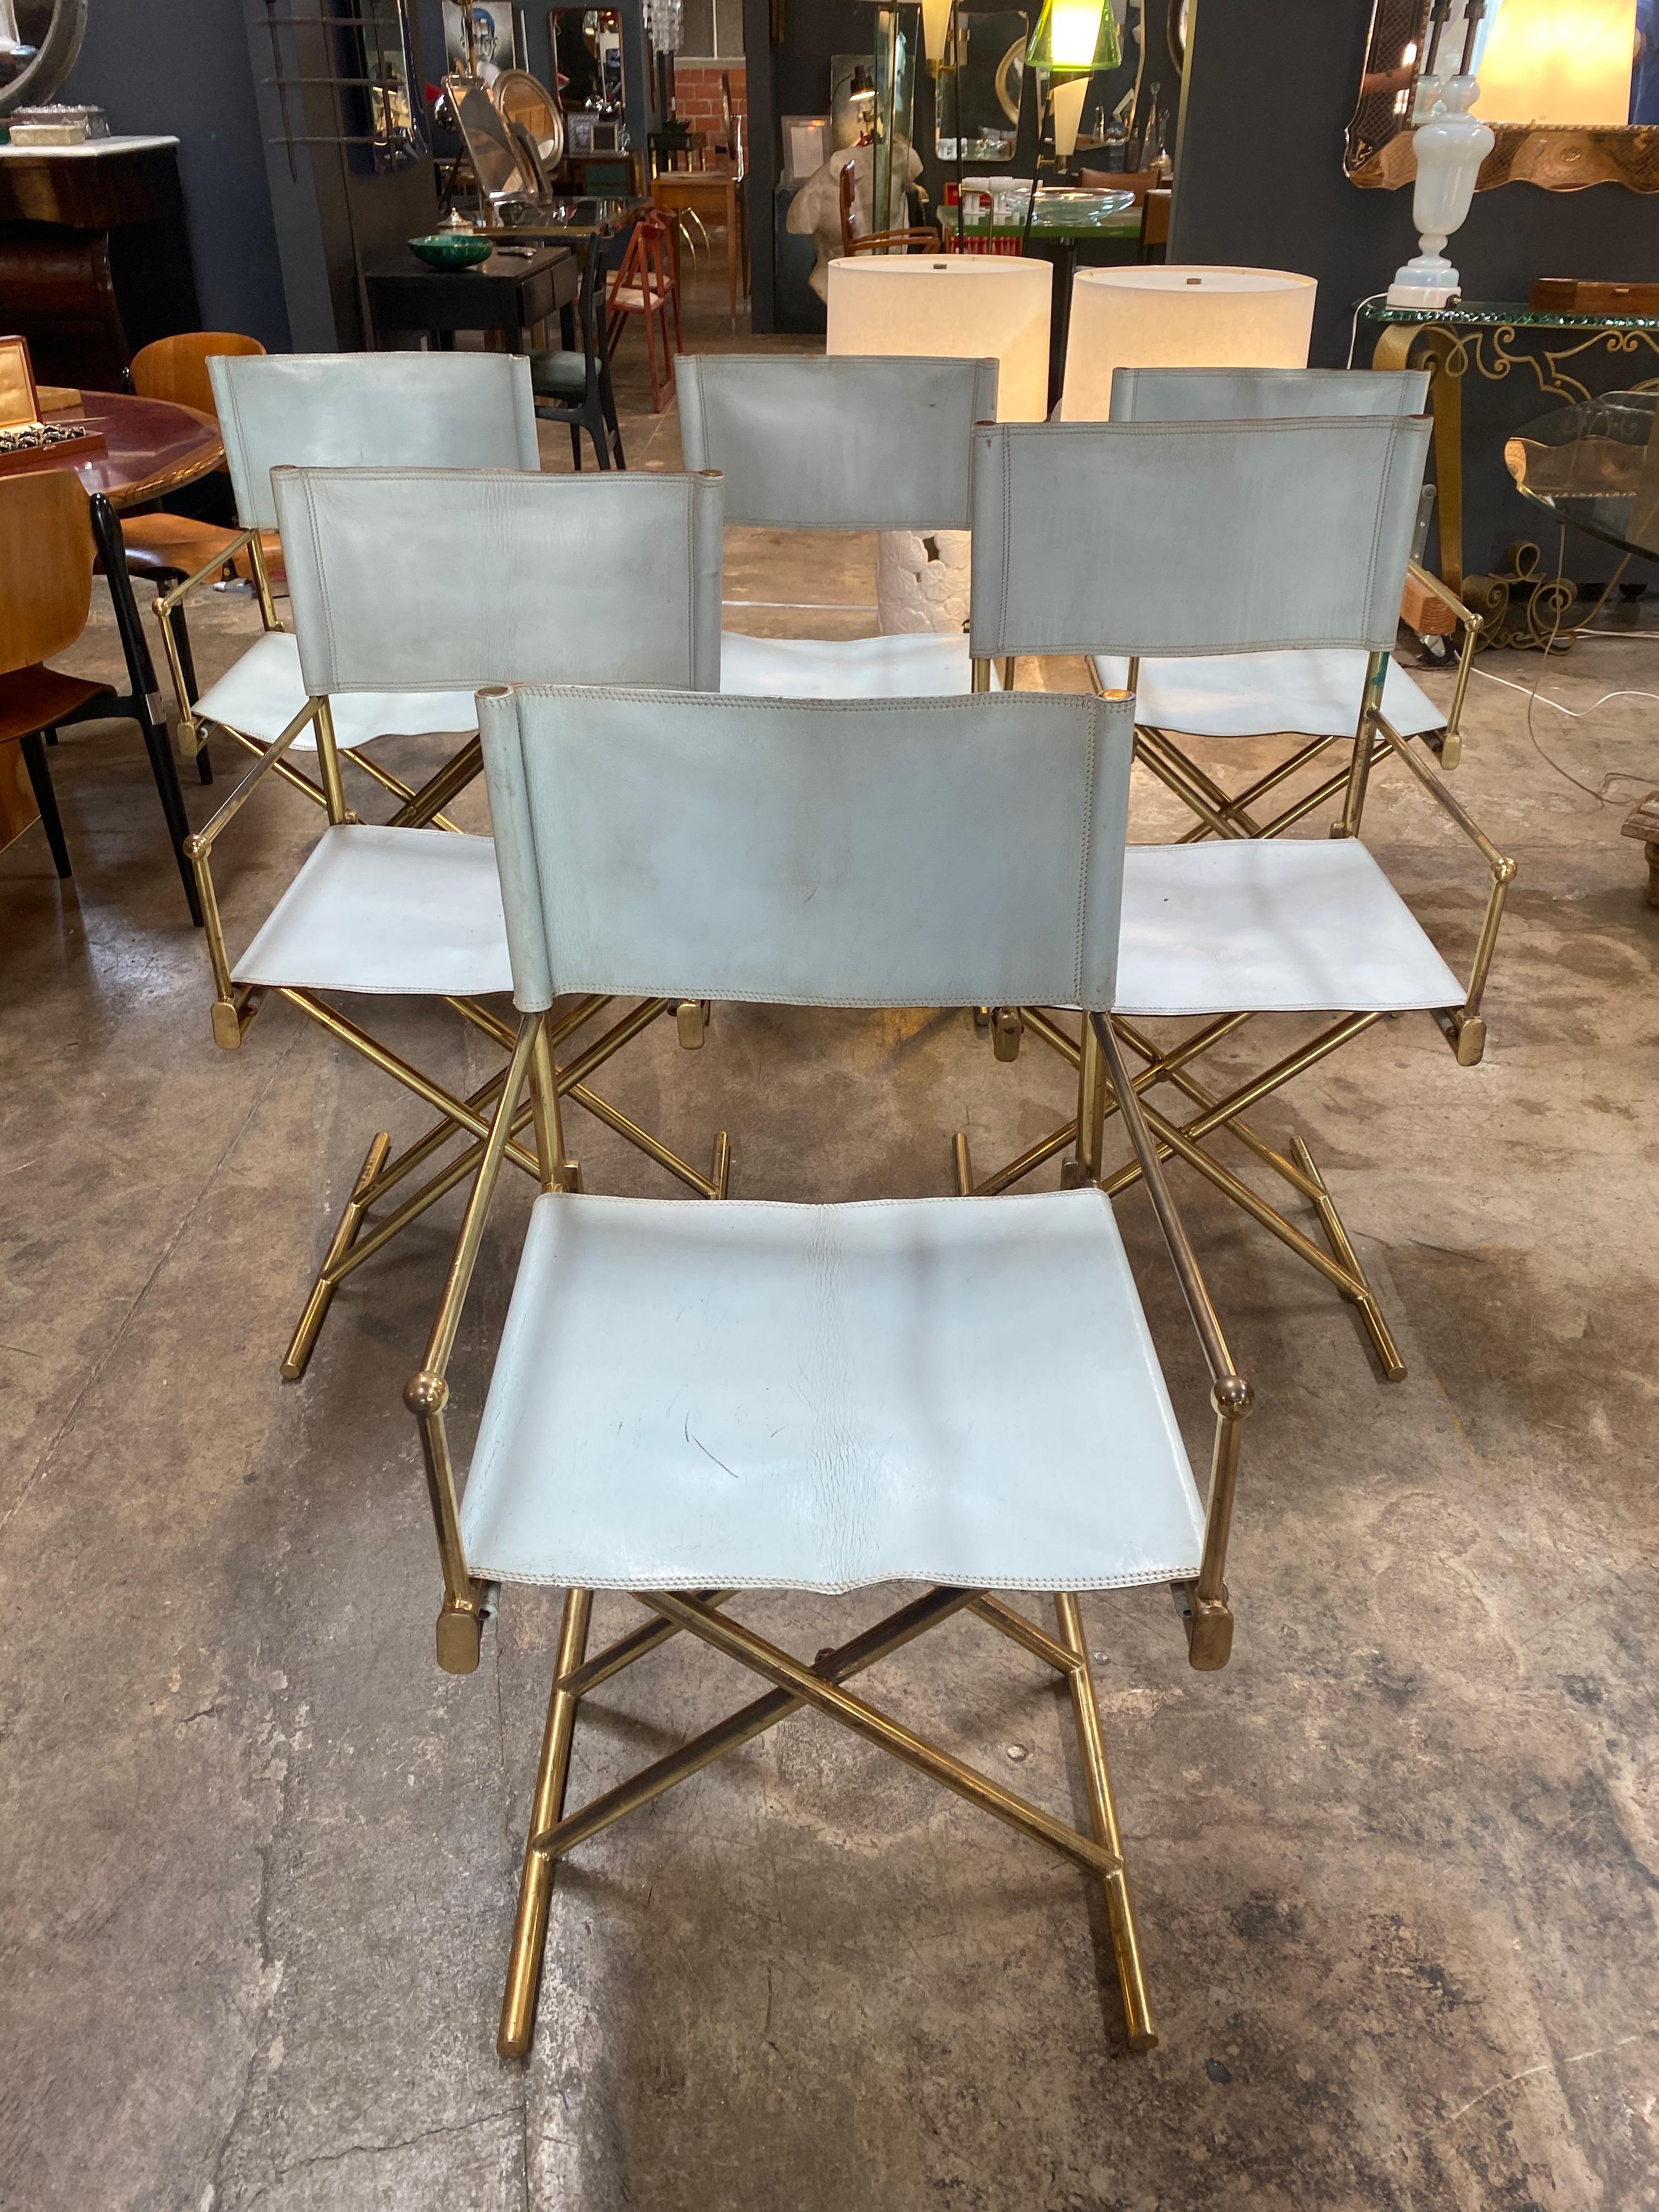 Set of 6 director's chair in brass and white leather, Italy, 1970s.
Director's chair. An intriguing upscale of this Classic armchair.
Care of details for this evergreen design. See photos.
Here pictured with a beautiful Tuscan leather.